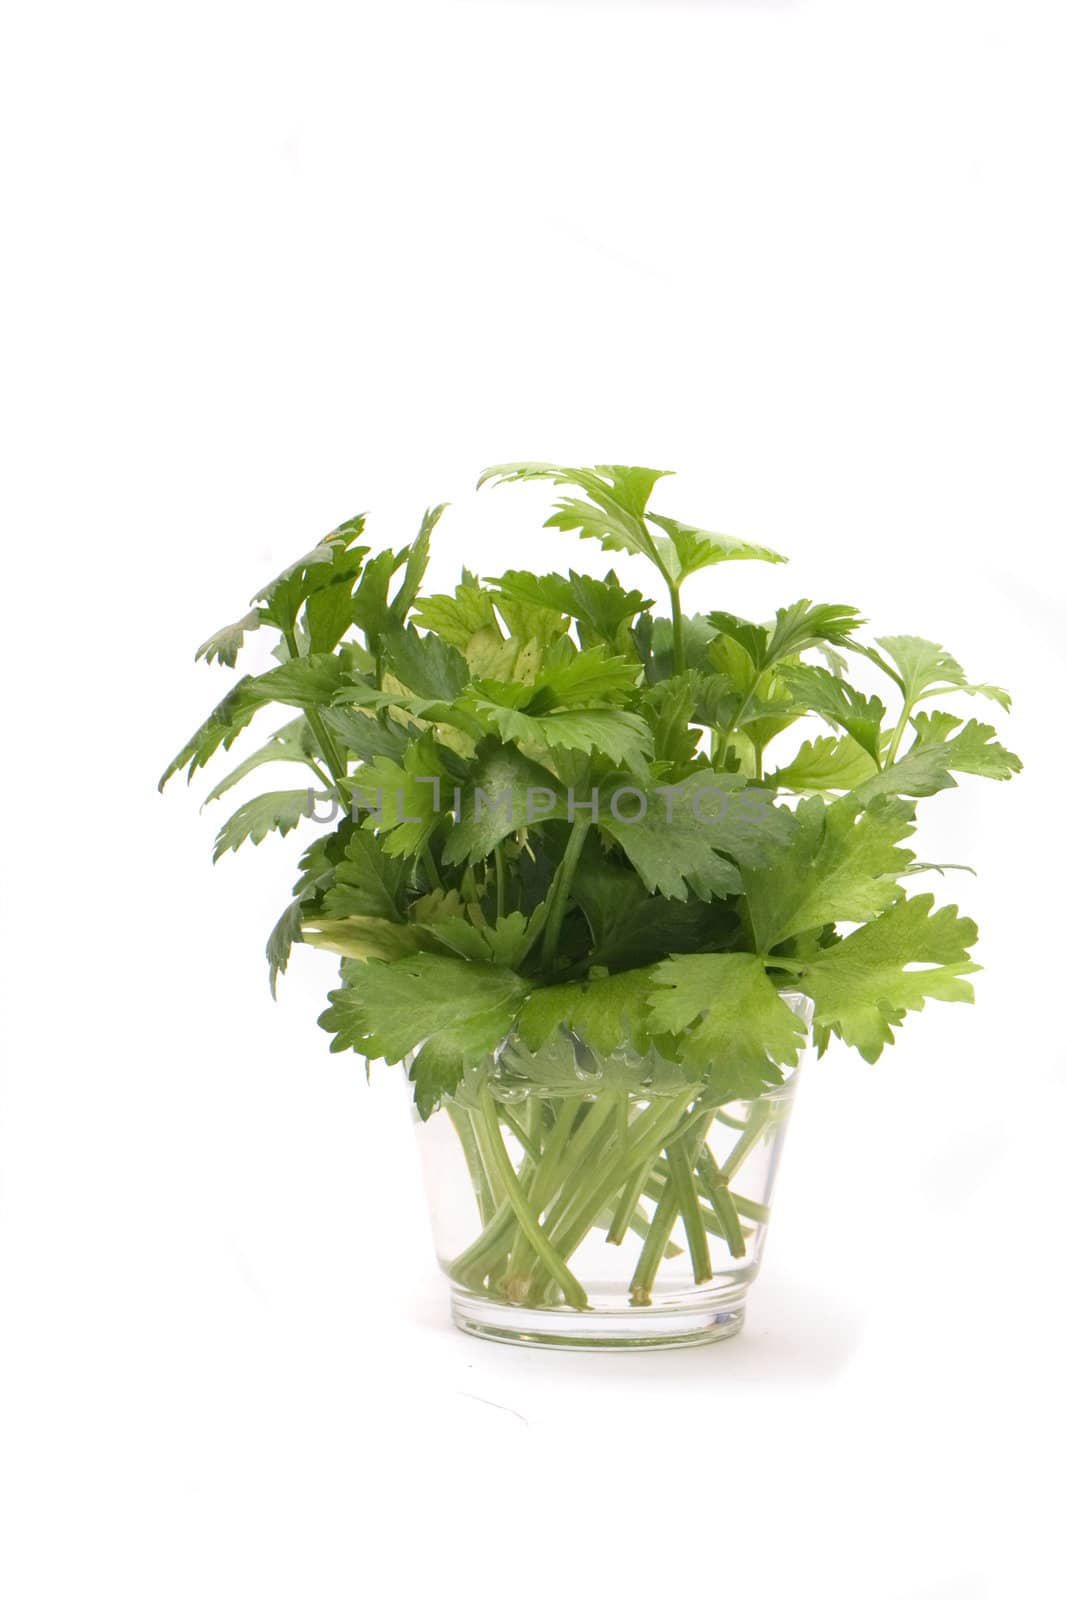 many green herbs on the white background